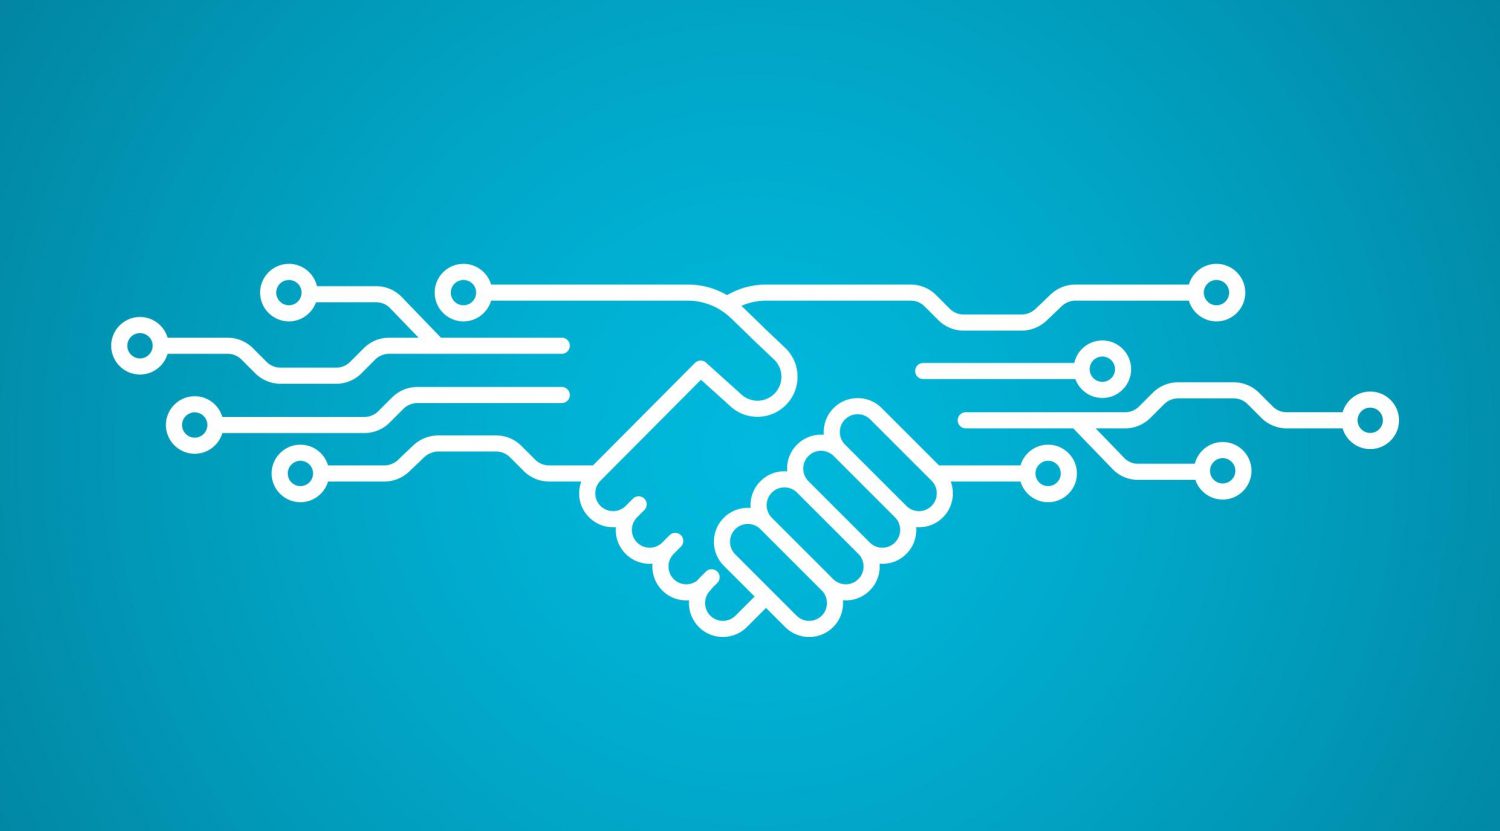 What Should You Know About Smart Contracts?